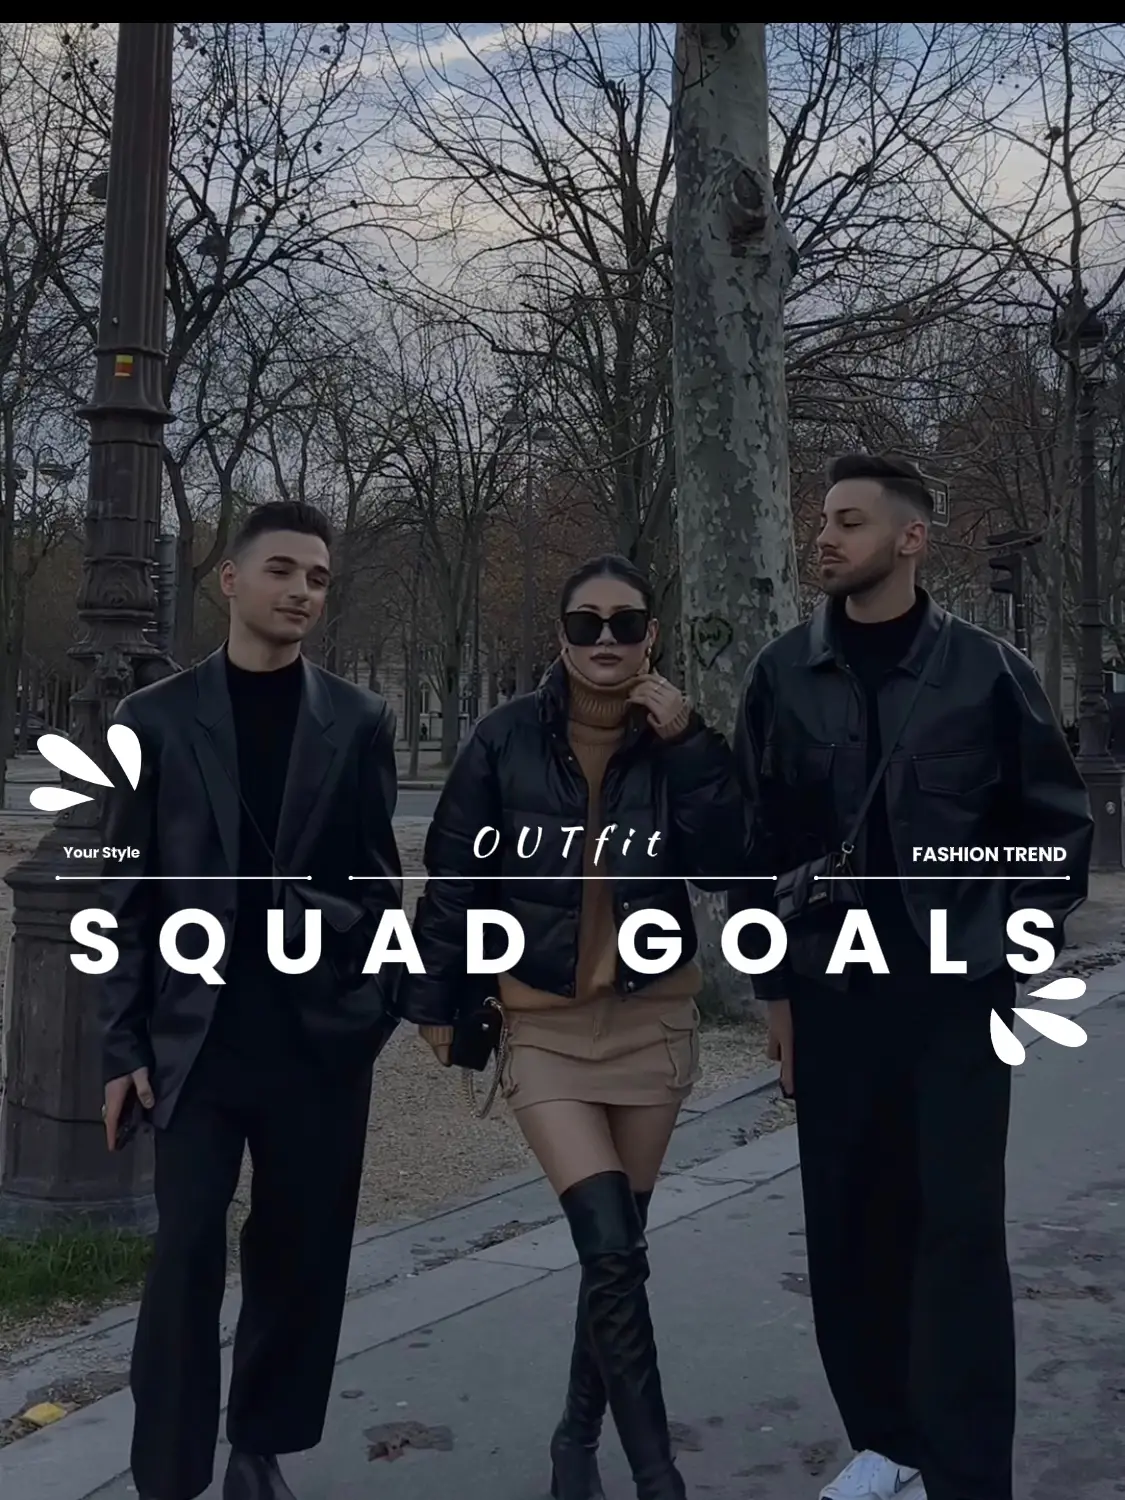 SQUAD goals, Leather!, Video published by Chui